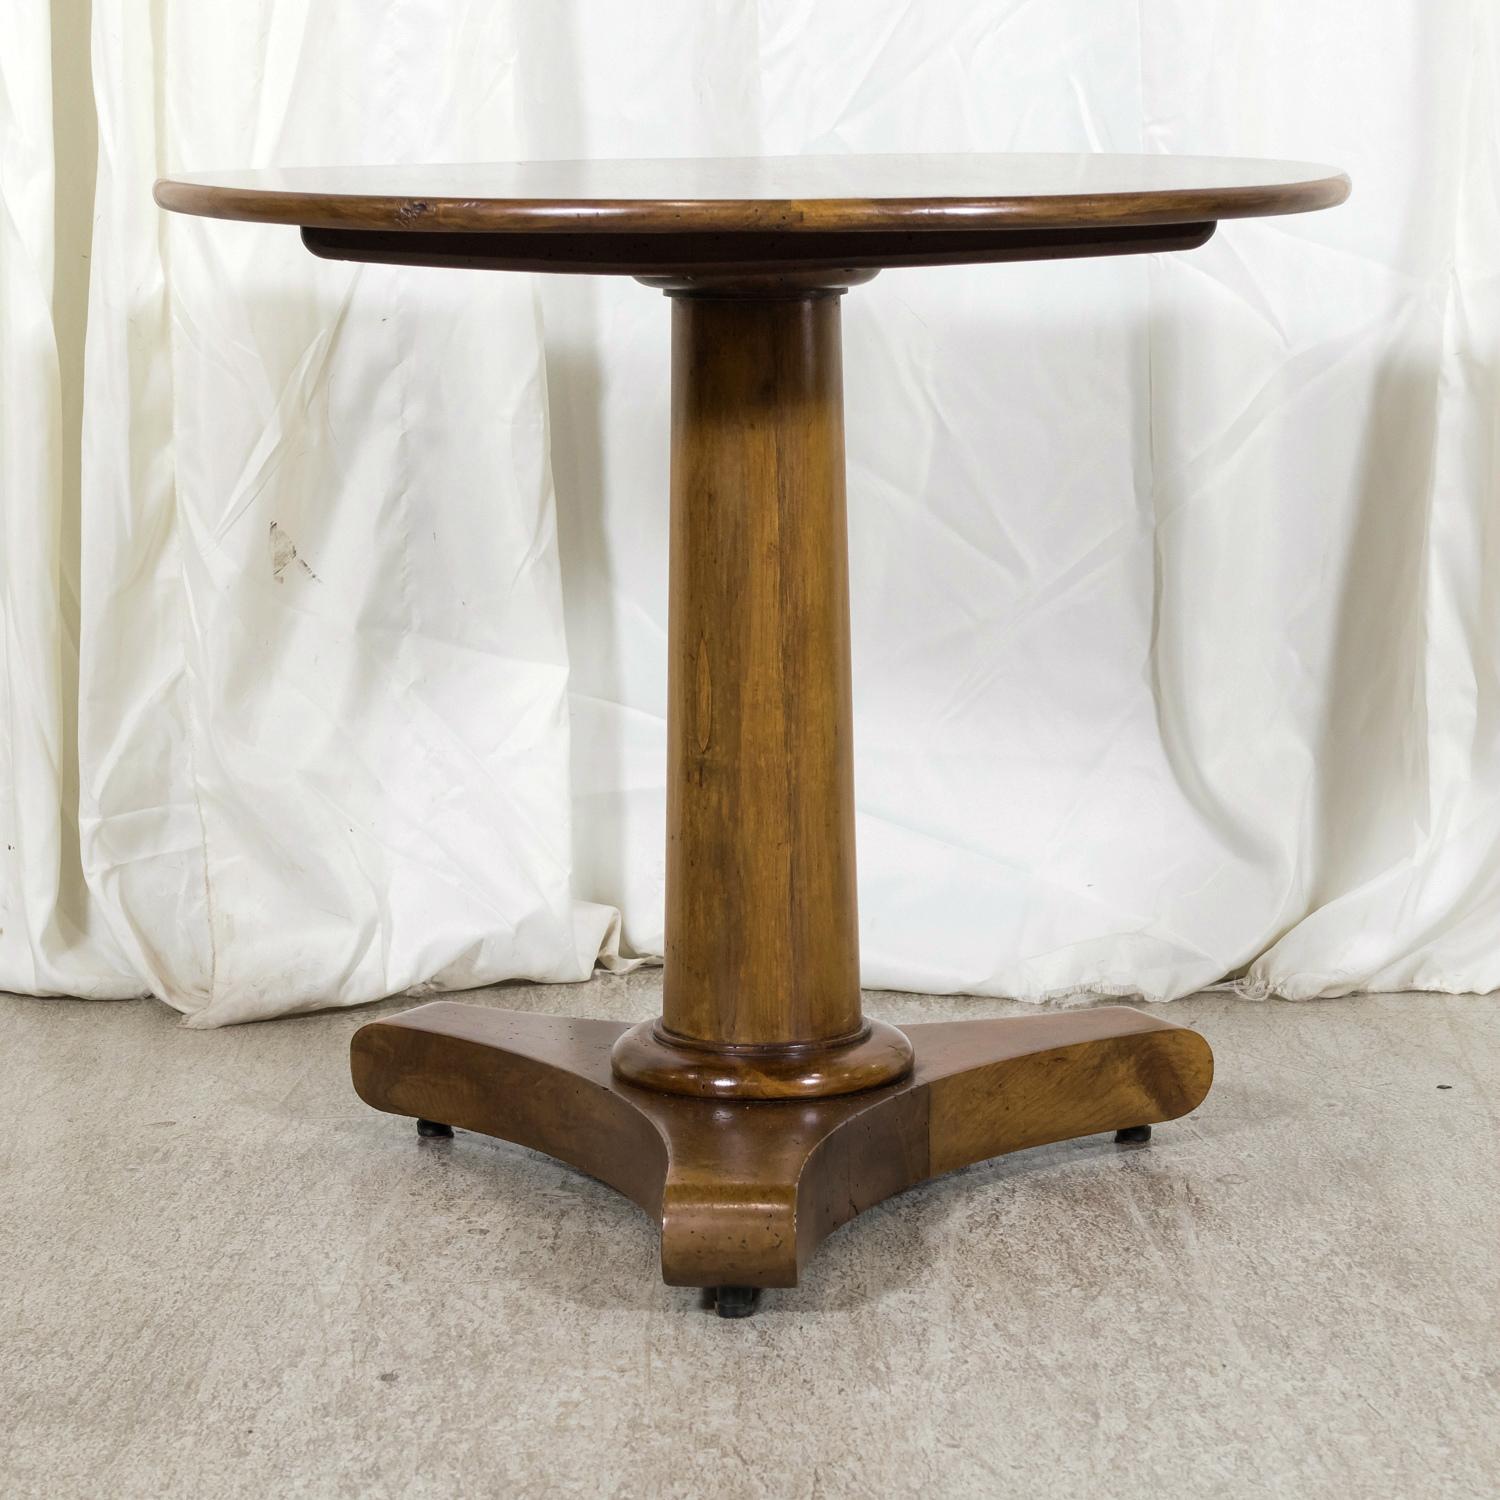 19th Century French Empire Period Solid Walnut Tilt Top Gueridon Side Table 13